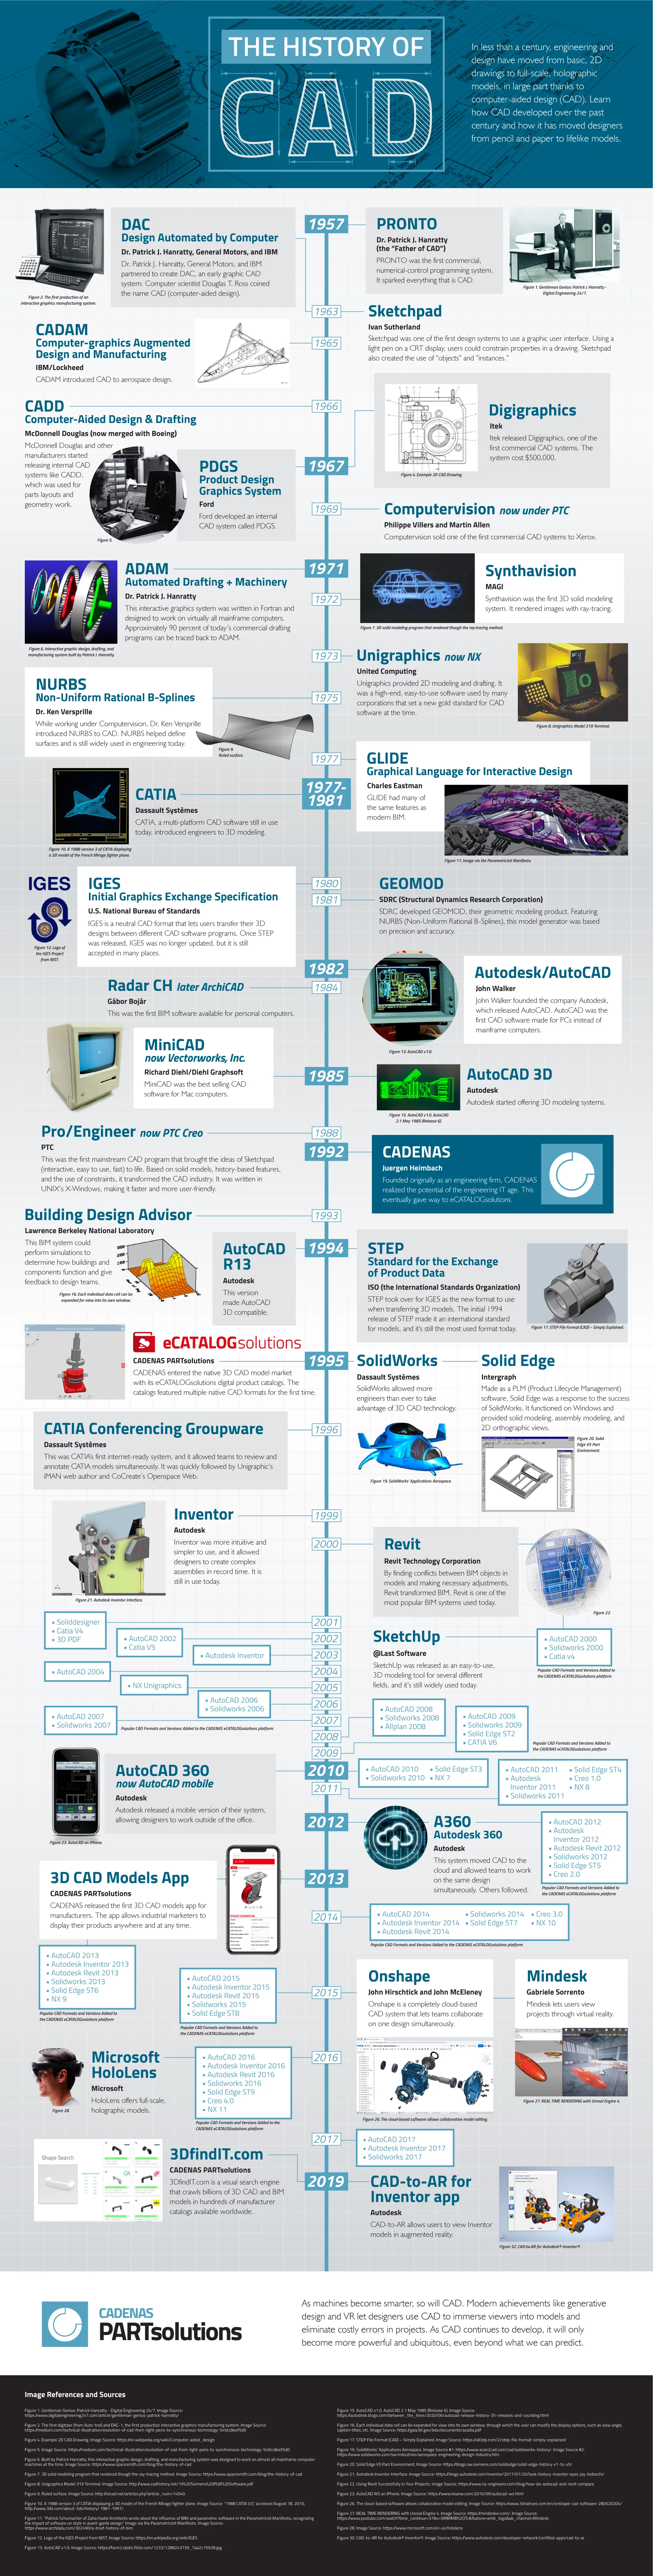 https://partsolutions.com/wp-content/uploads/2021/09/2021-History-of-CAD-Infographic_2000.png